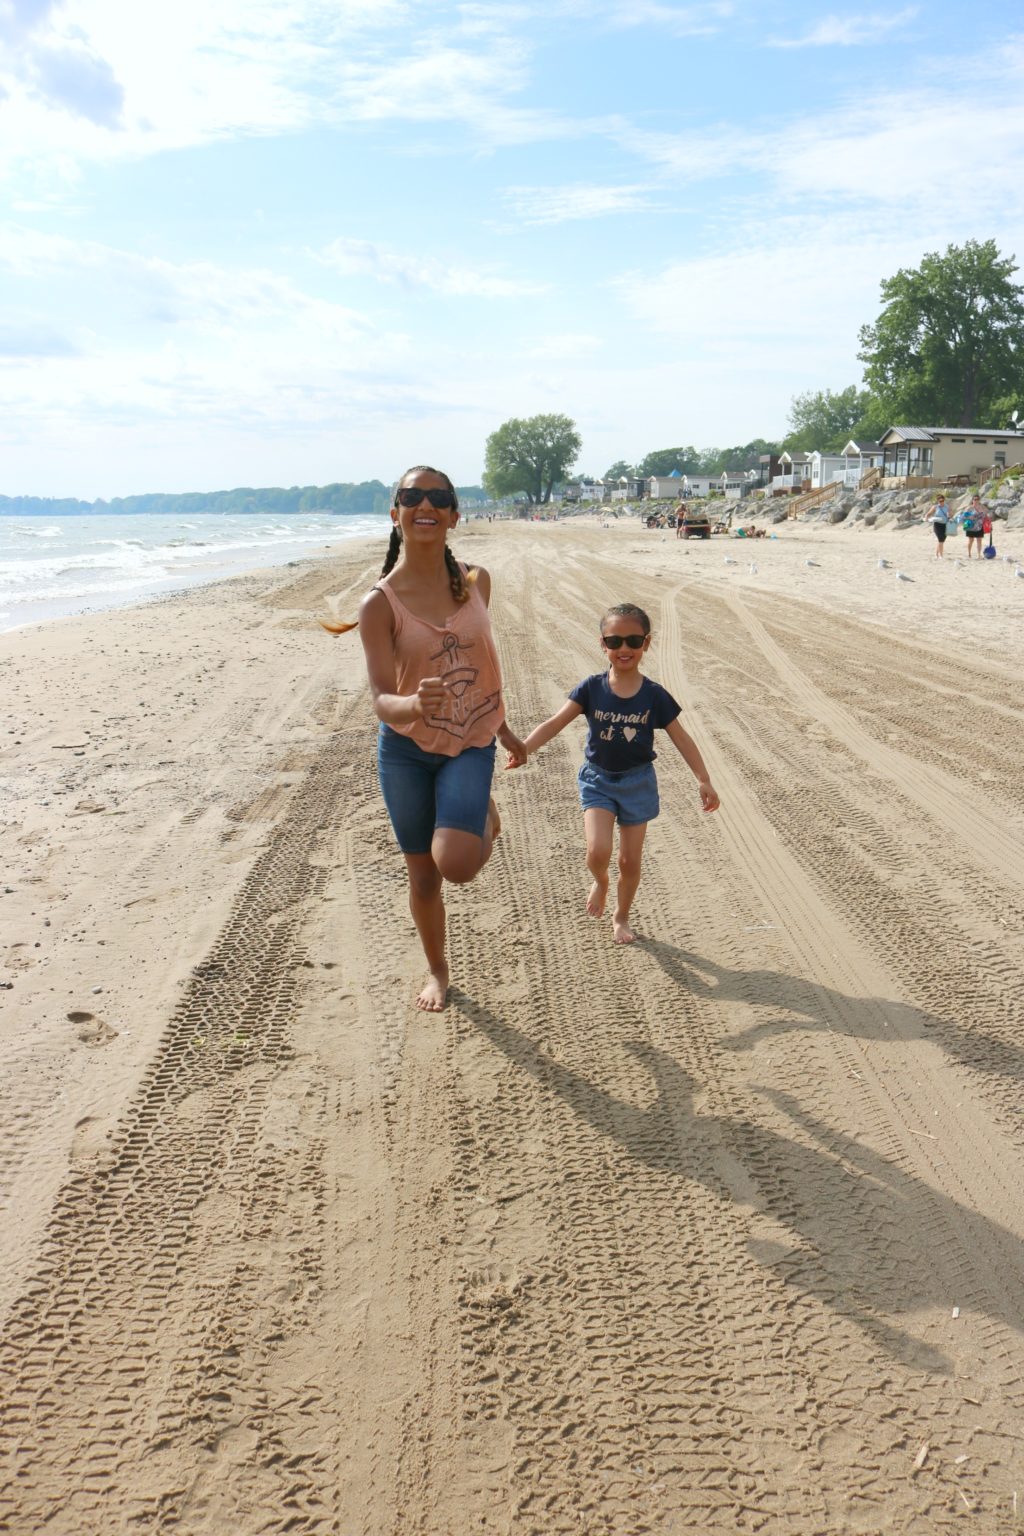 10 Reasons Why You Need to Visit Sherkston Shores with Your Family